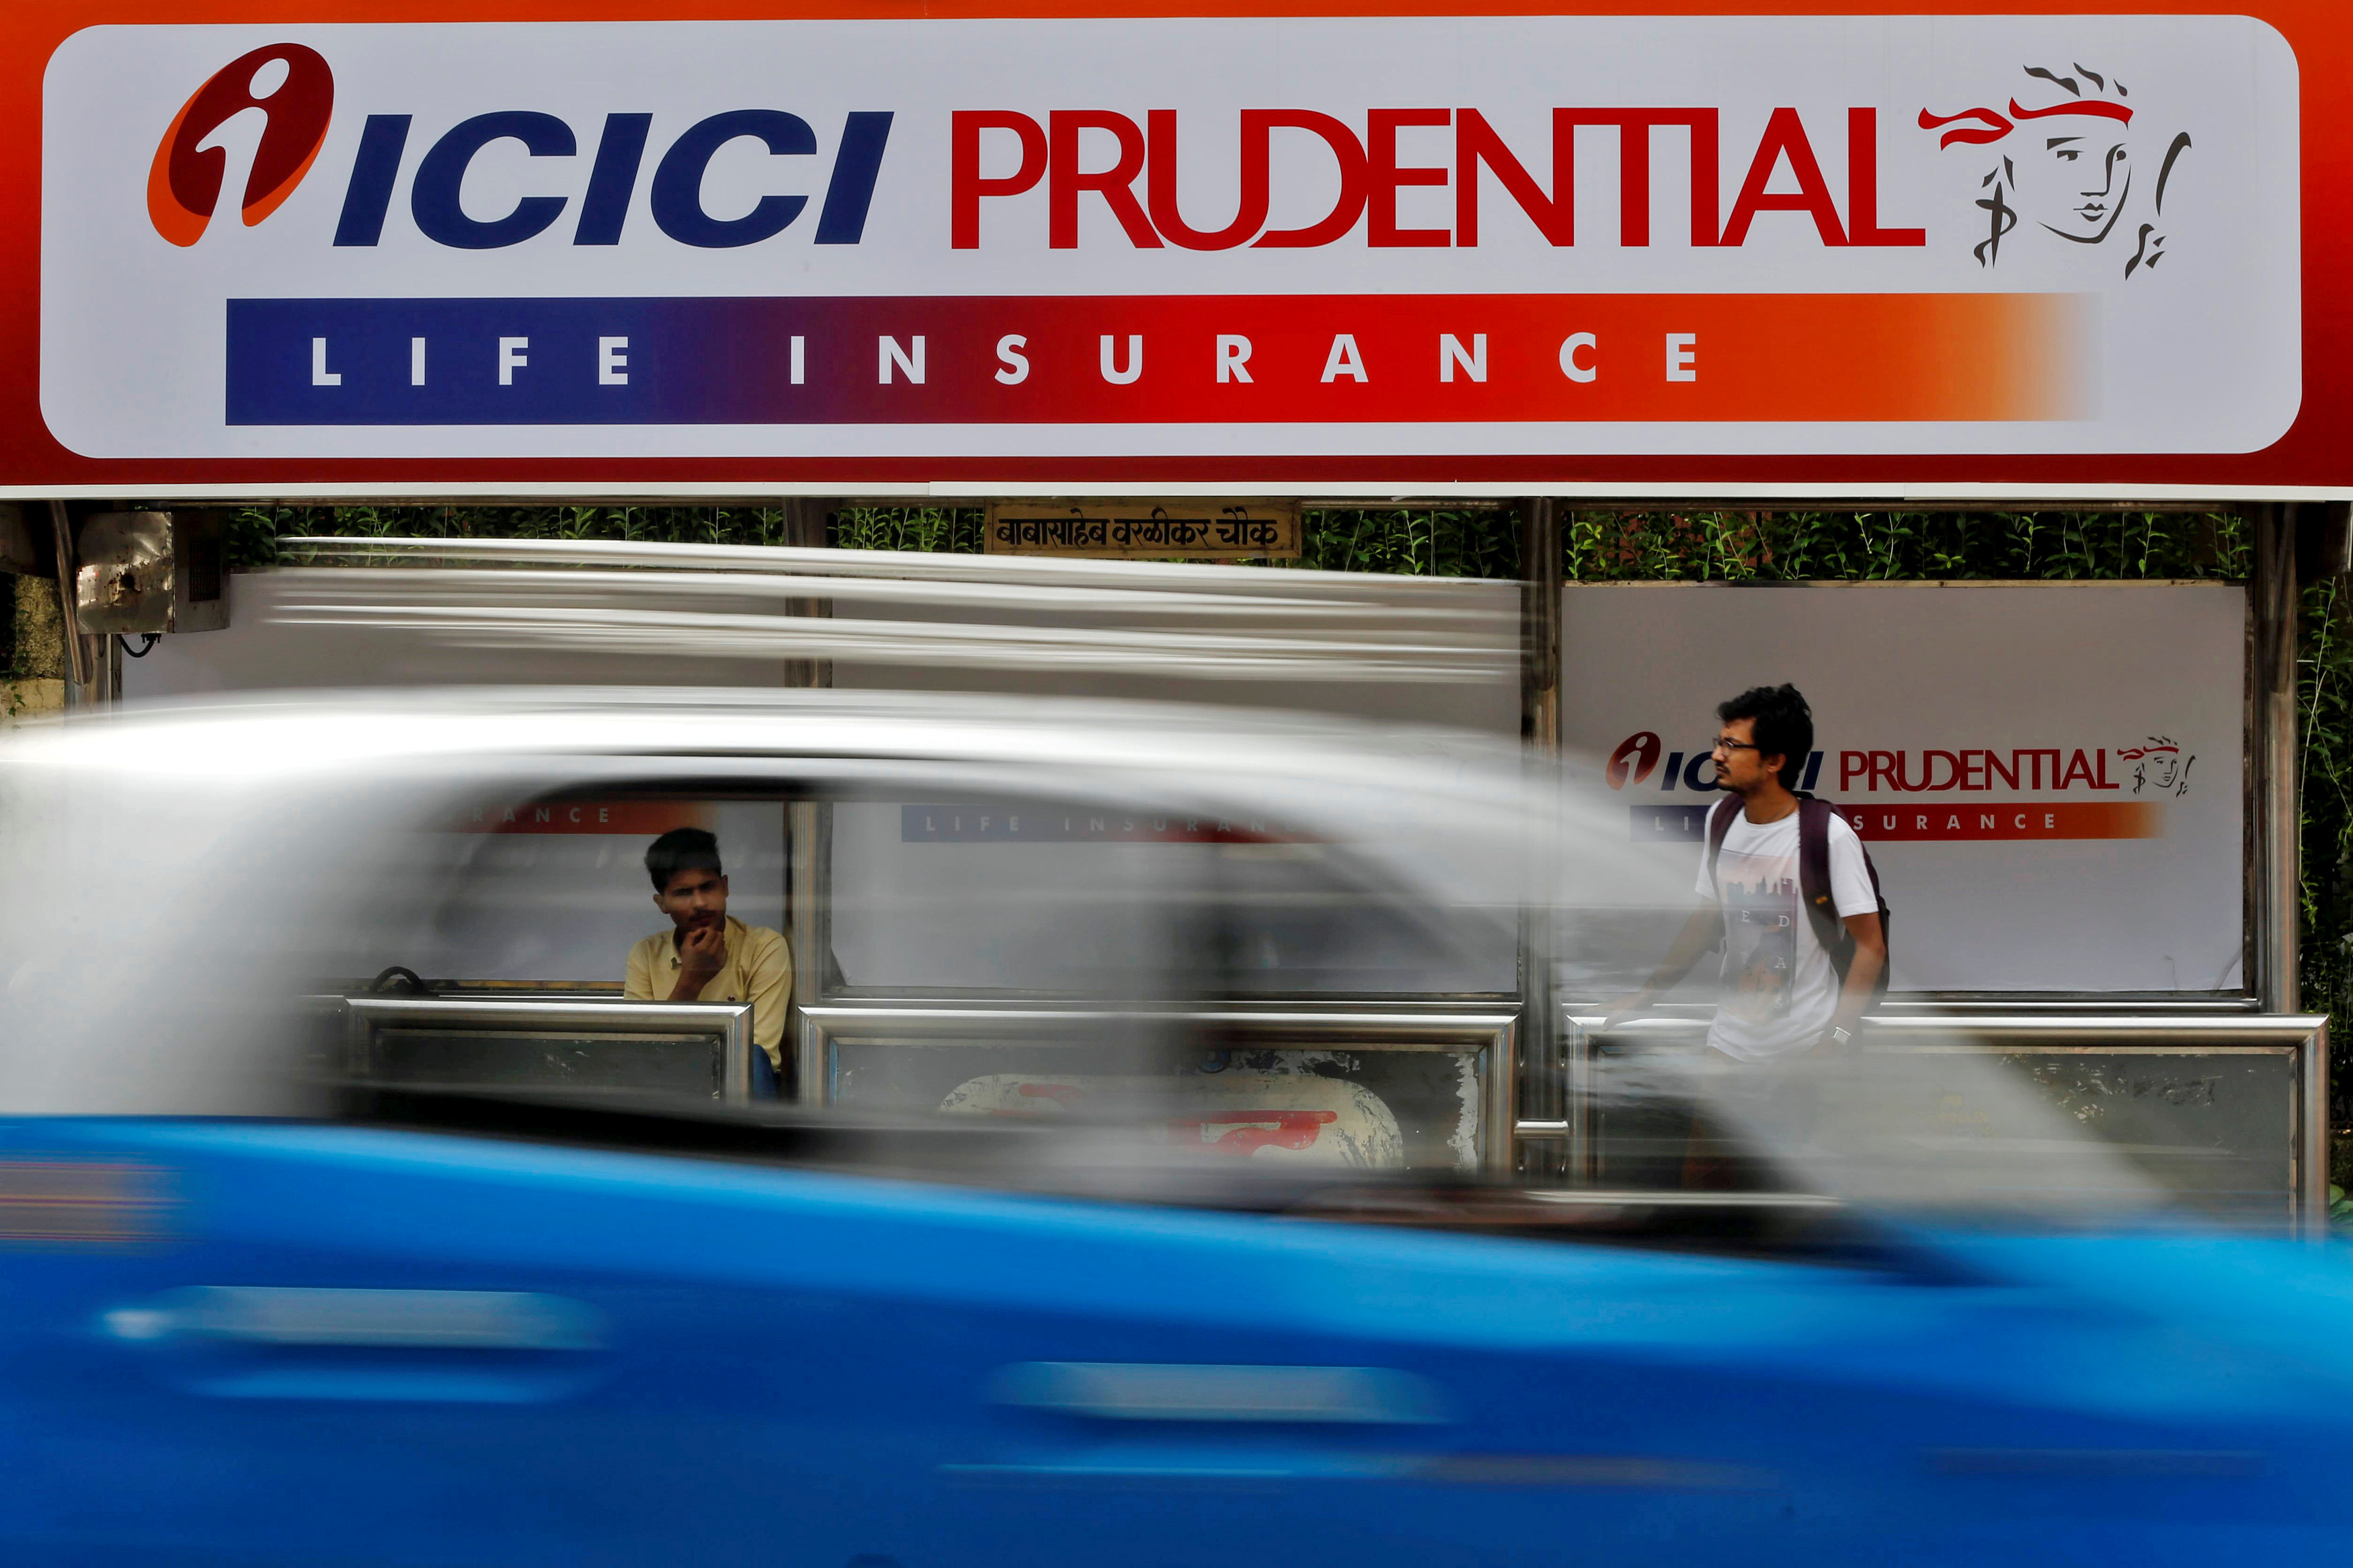 Passengers wait in front of an ICICI Prudential billboard at a bus stop in Mumbai